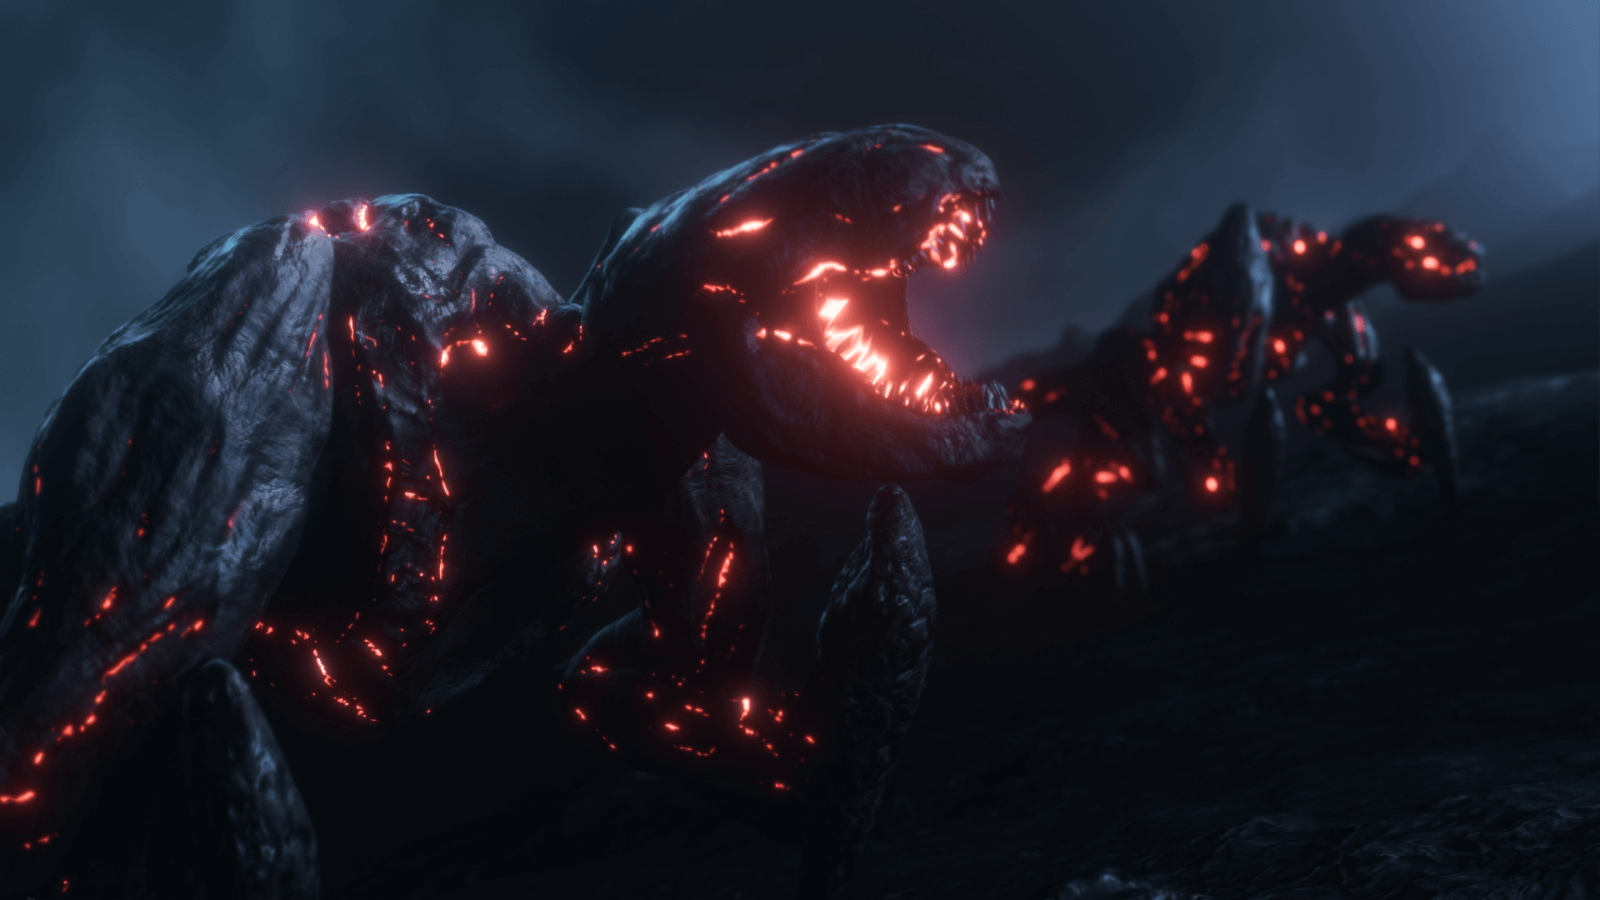 CGI fire monsters